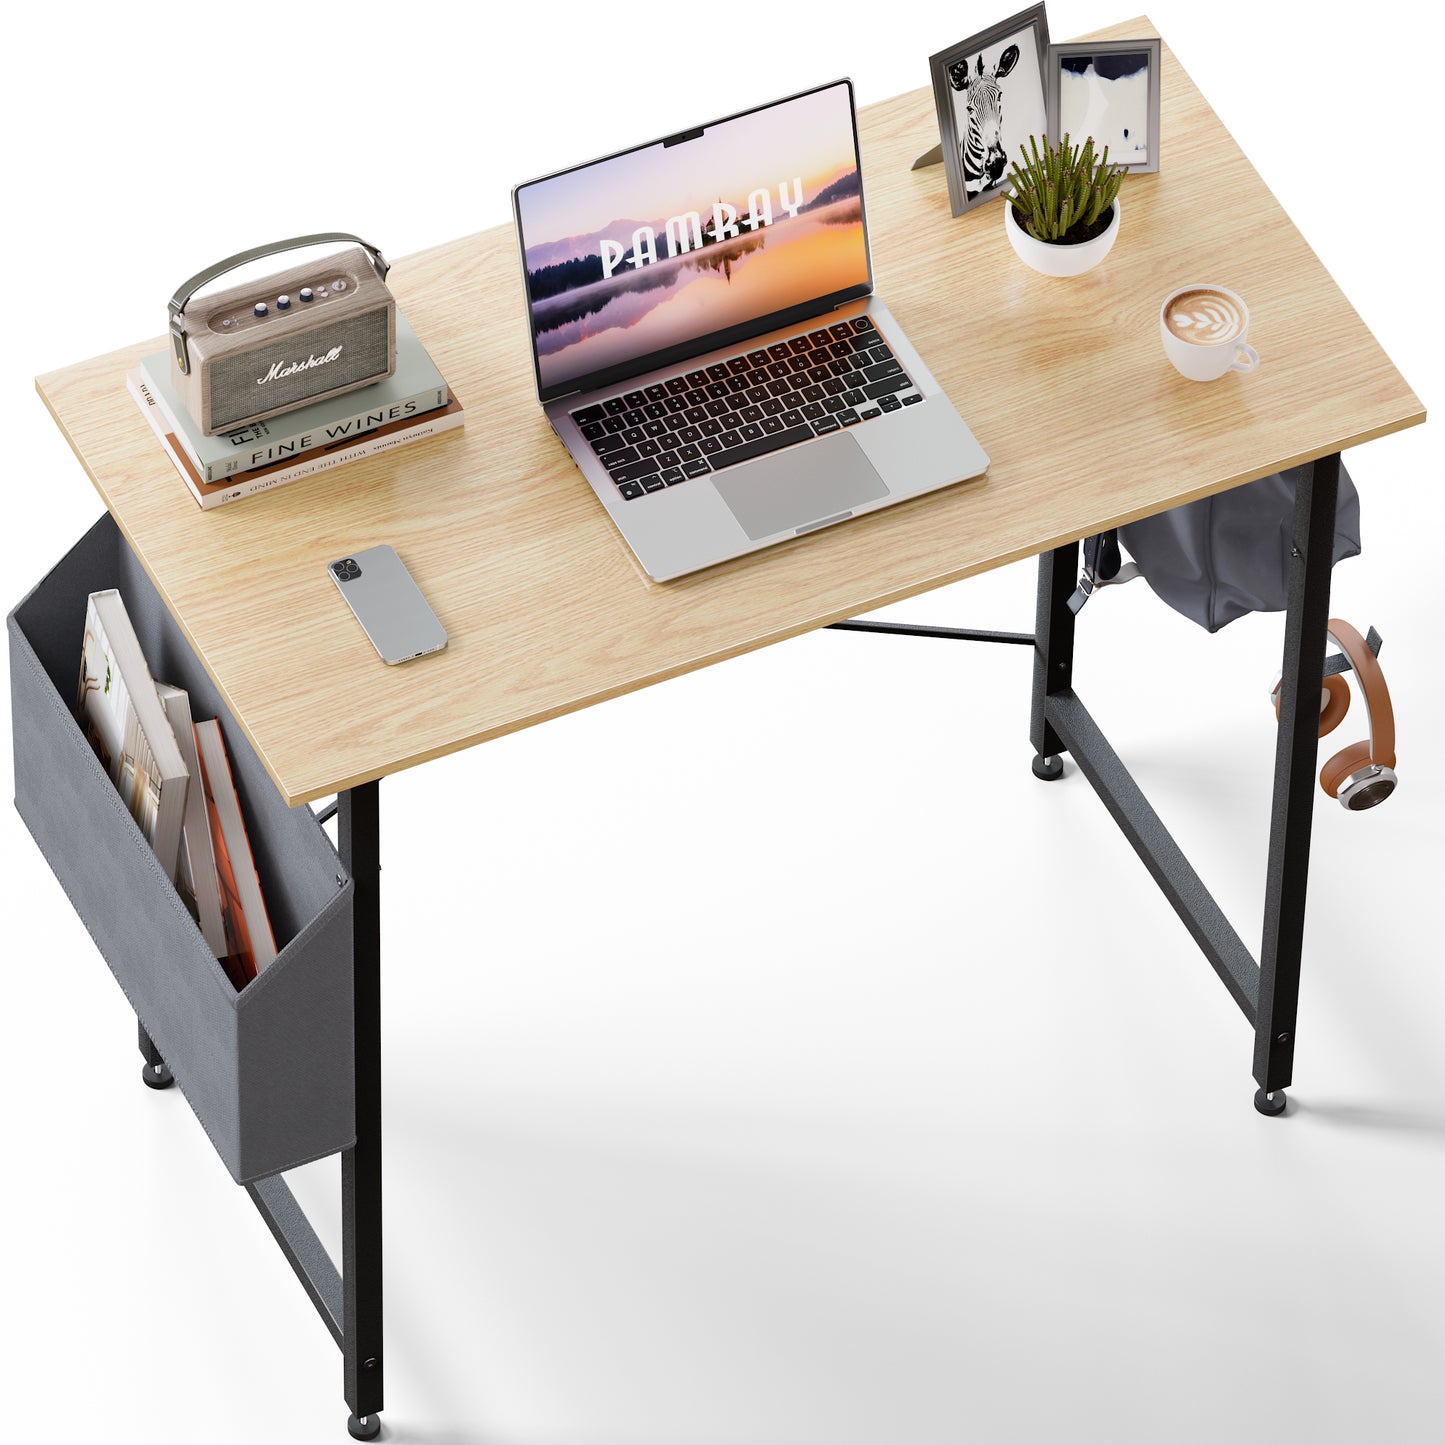 Pamray 32 Inch Computer Desk for Small Spaces with Storage Bag, Home Office Work Desk with Headphone Hook